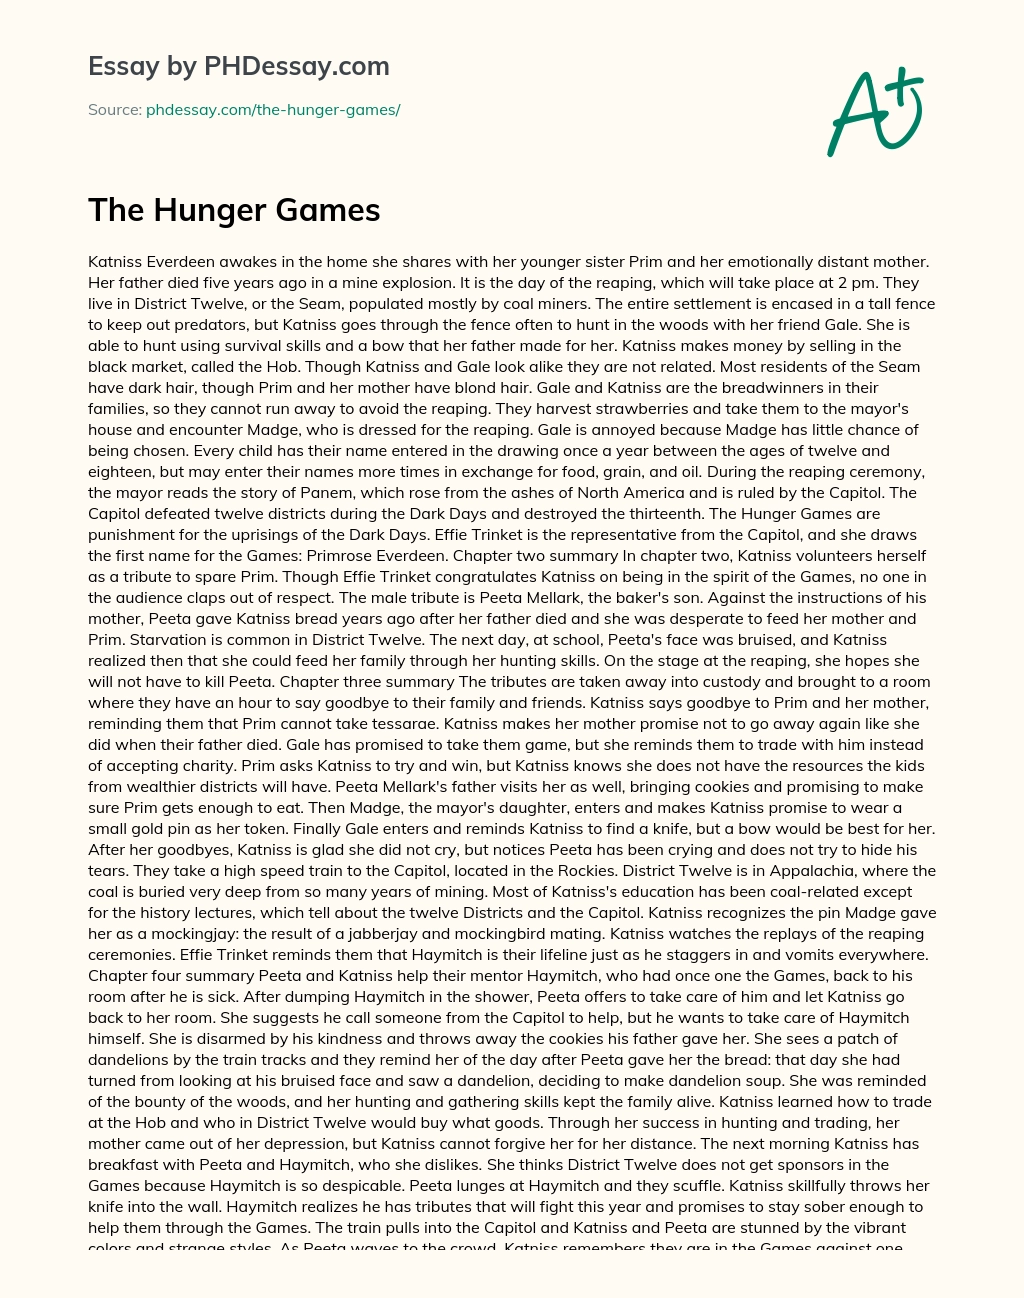 hunger games research paper topics